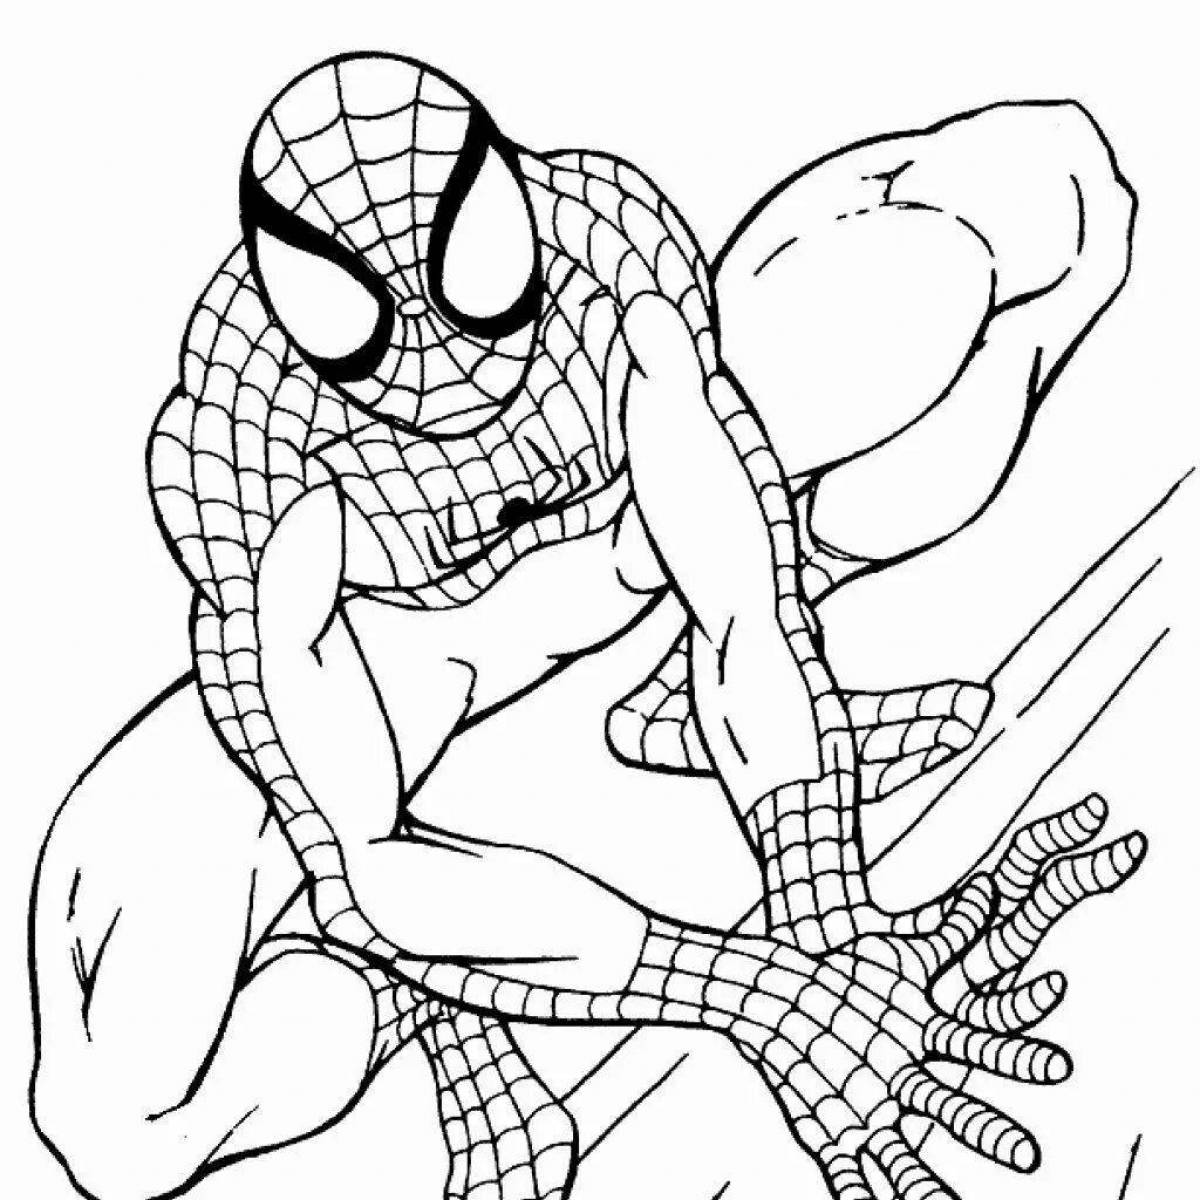 Spiderman team coloring page